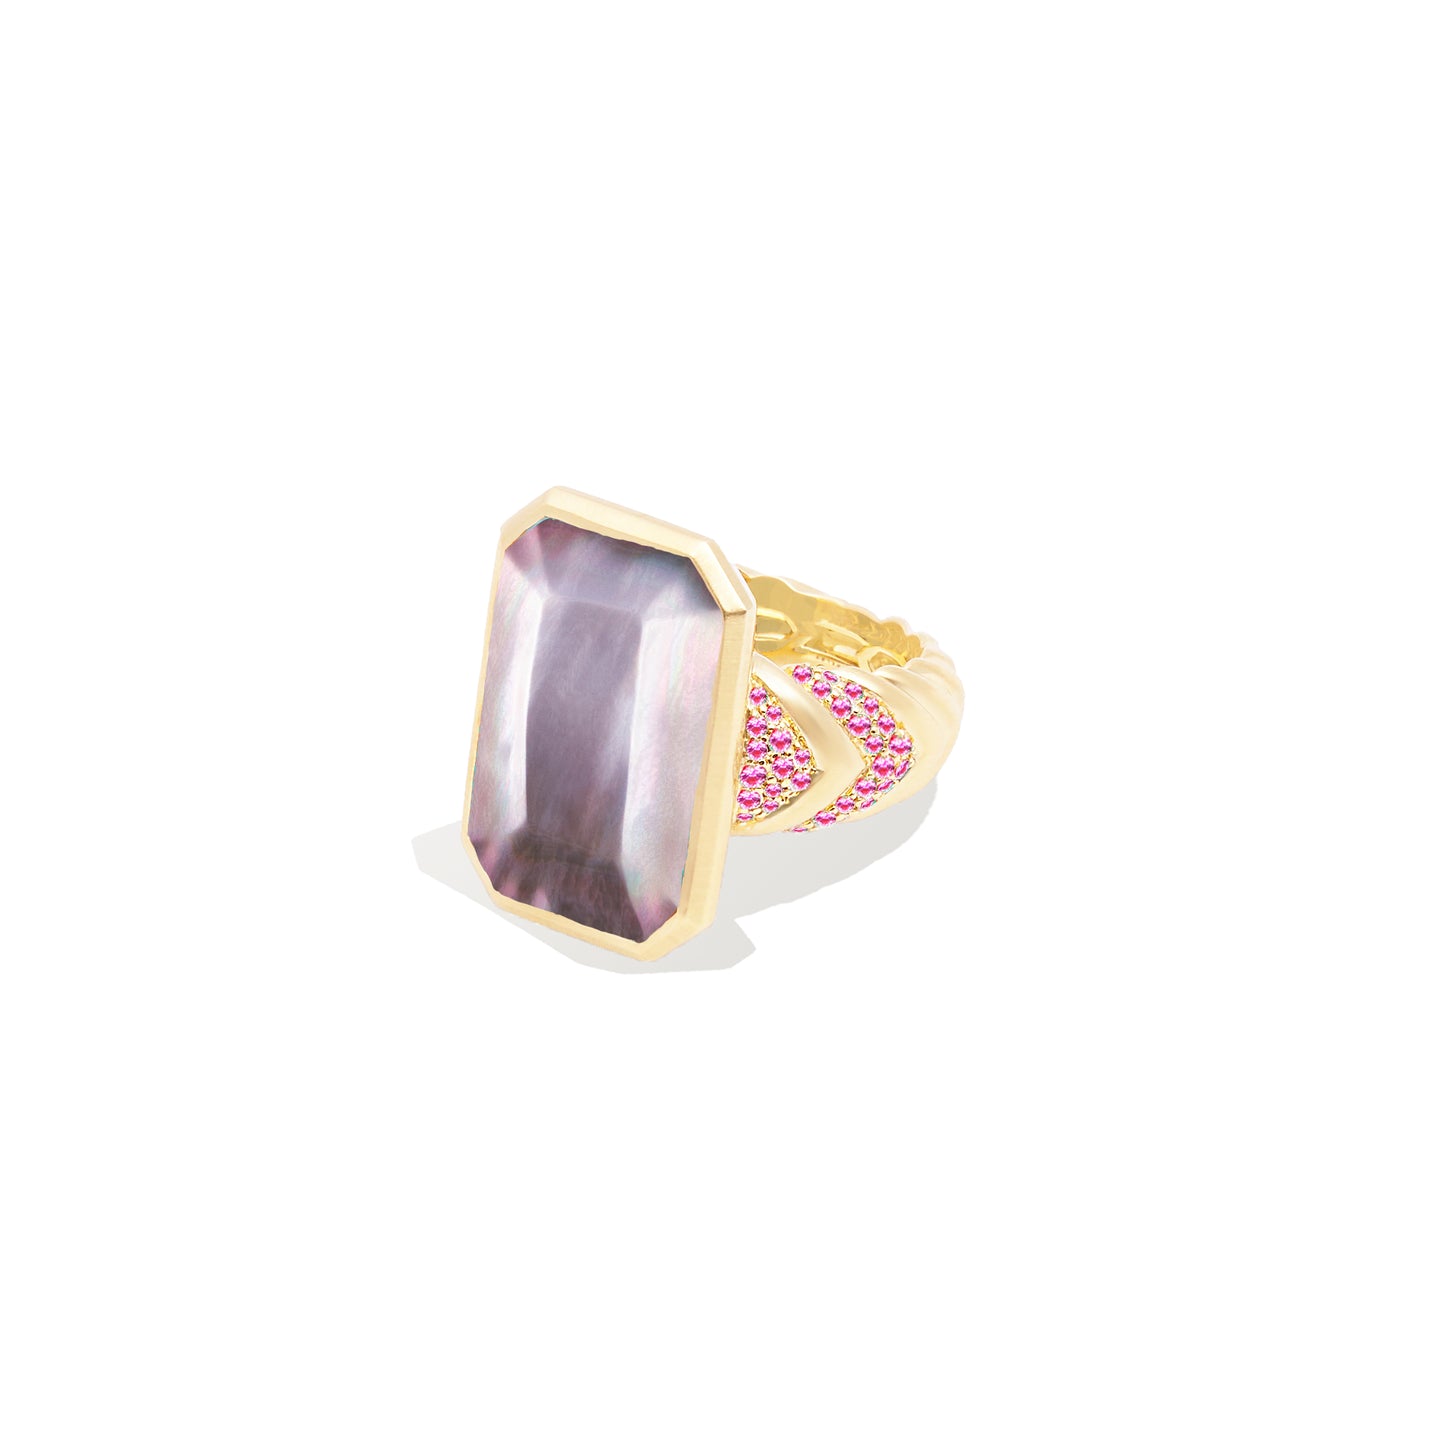 Spark Chevron Emerald Cut Cocktail Ring - Black Mother of Pearl & Pink Sapphire